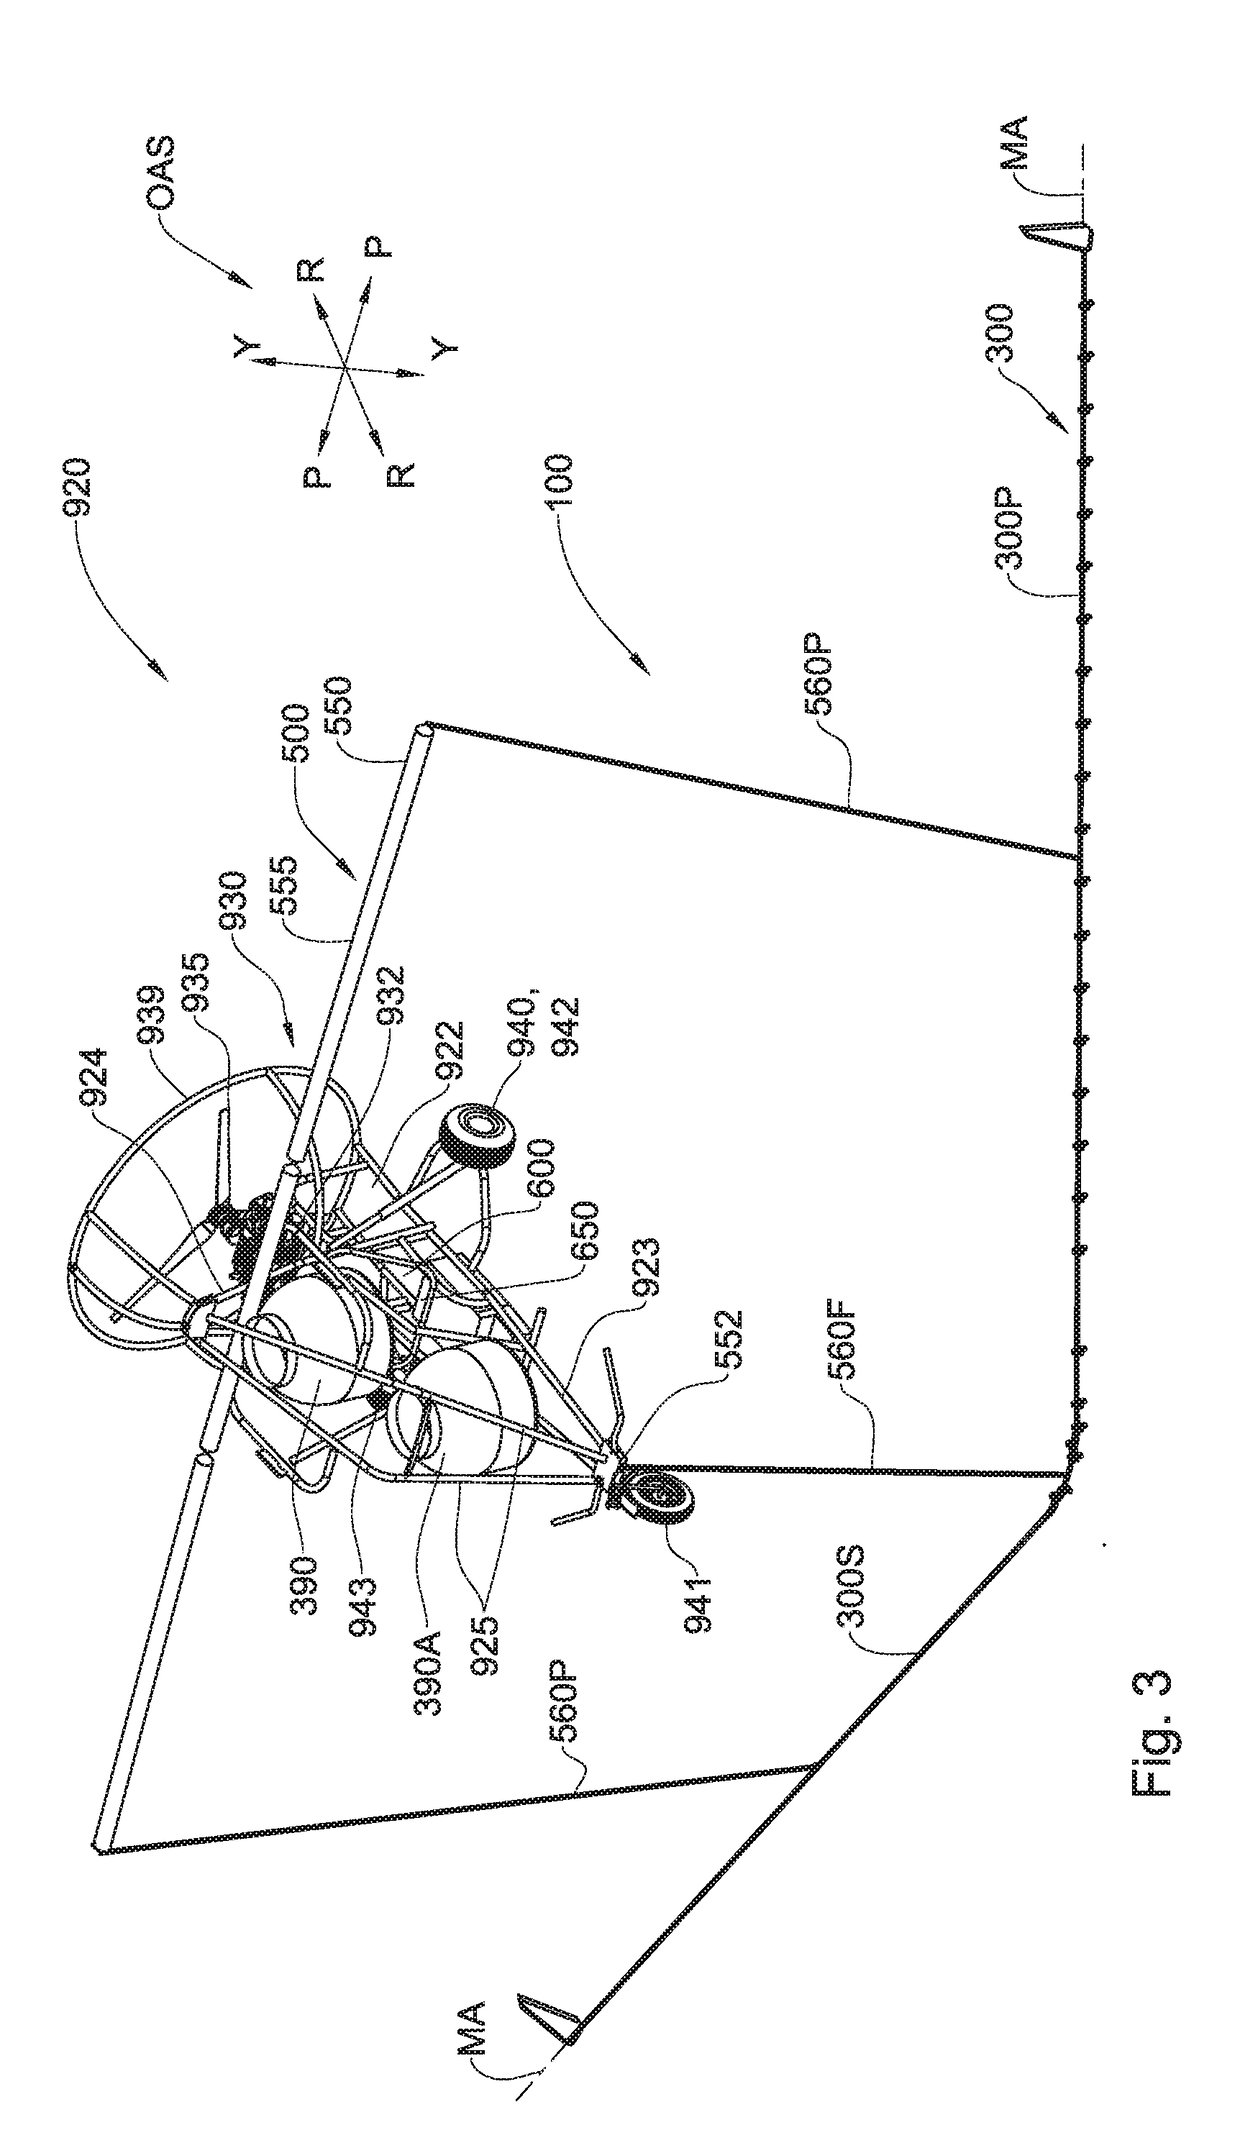 Aerial platforms for aerial spraying and methods for controlling the same